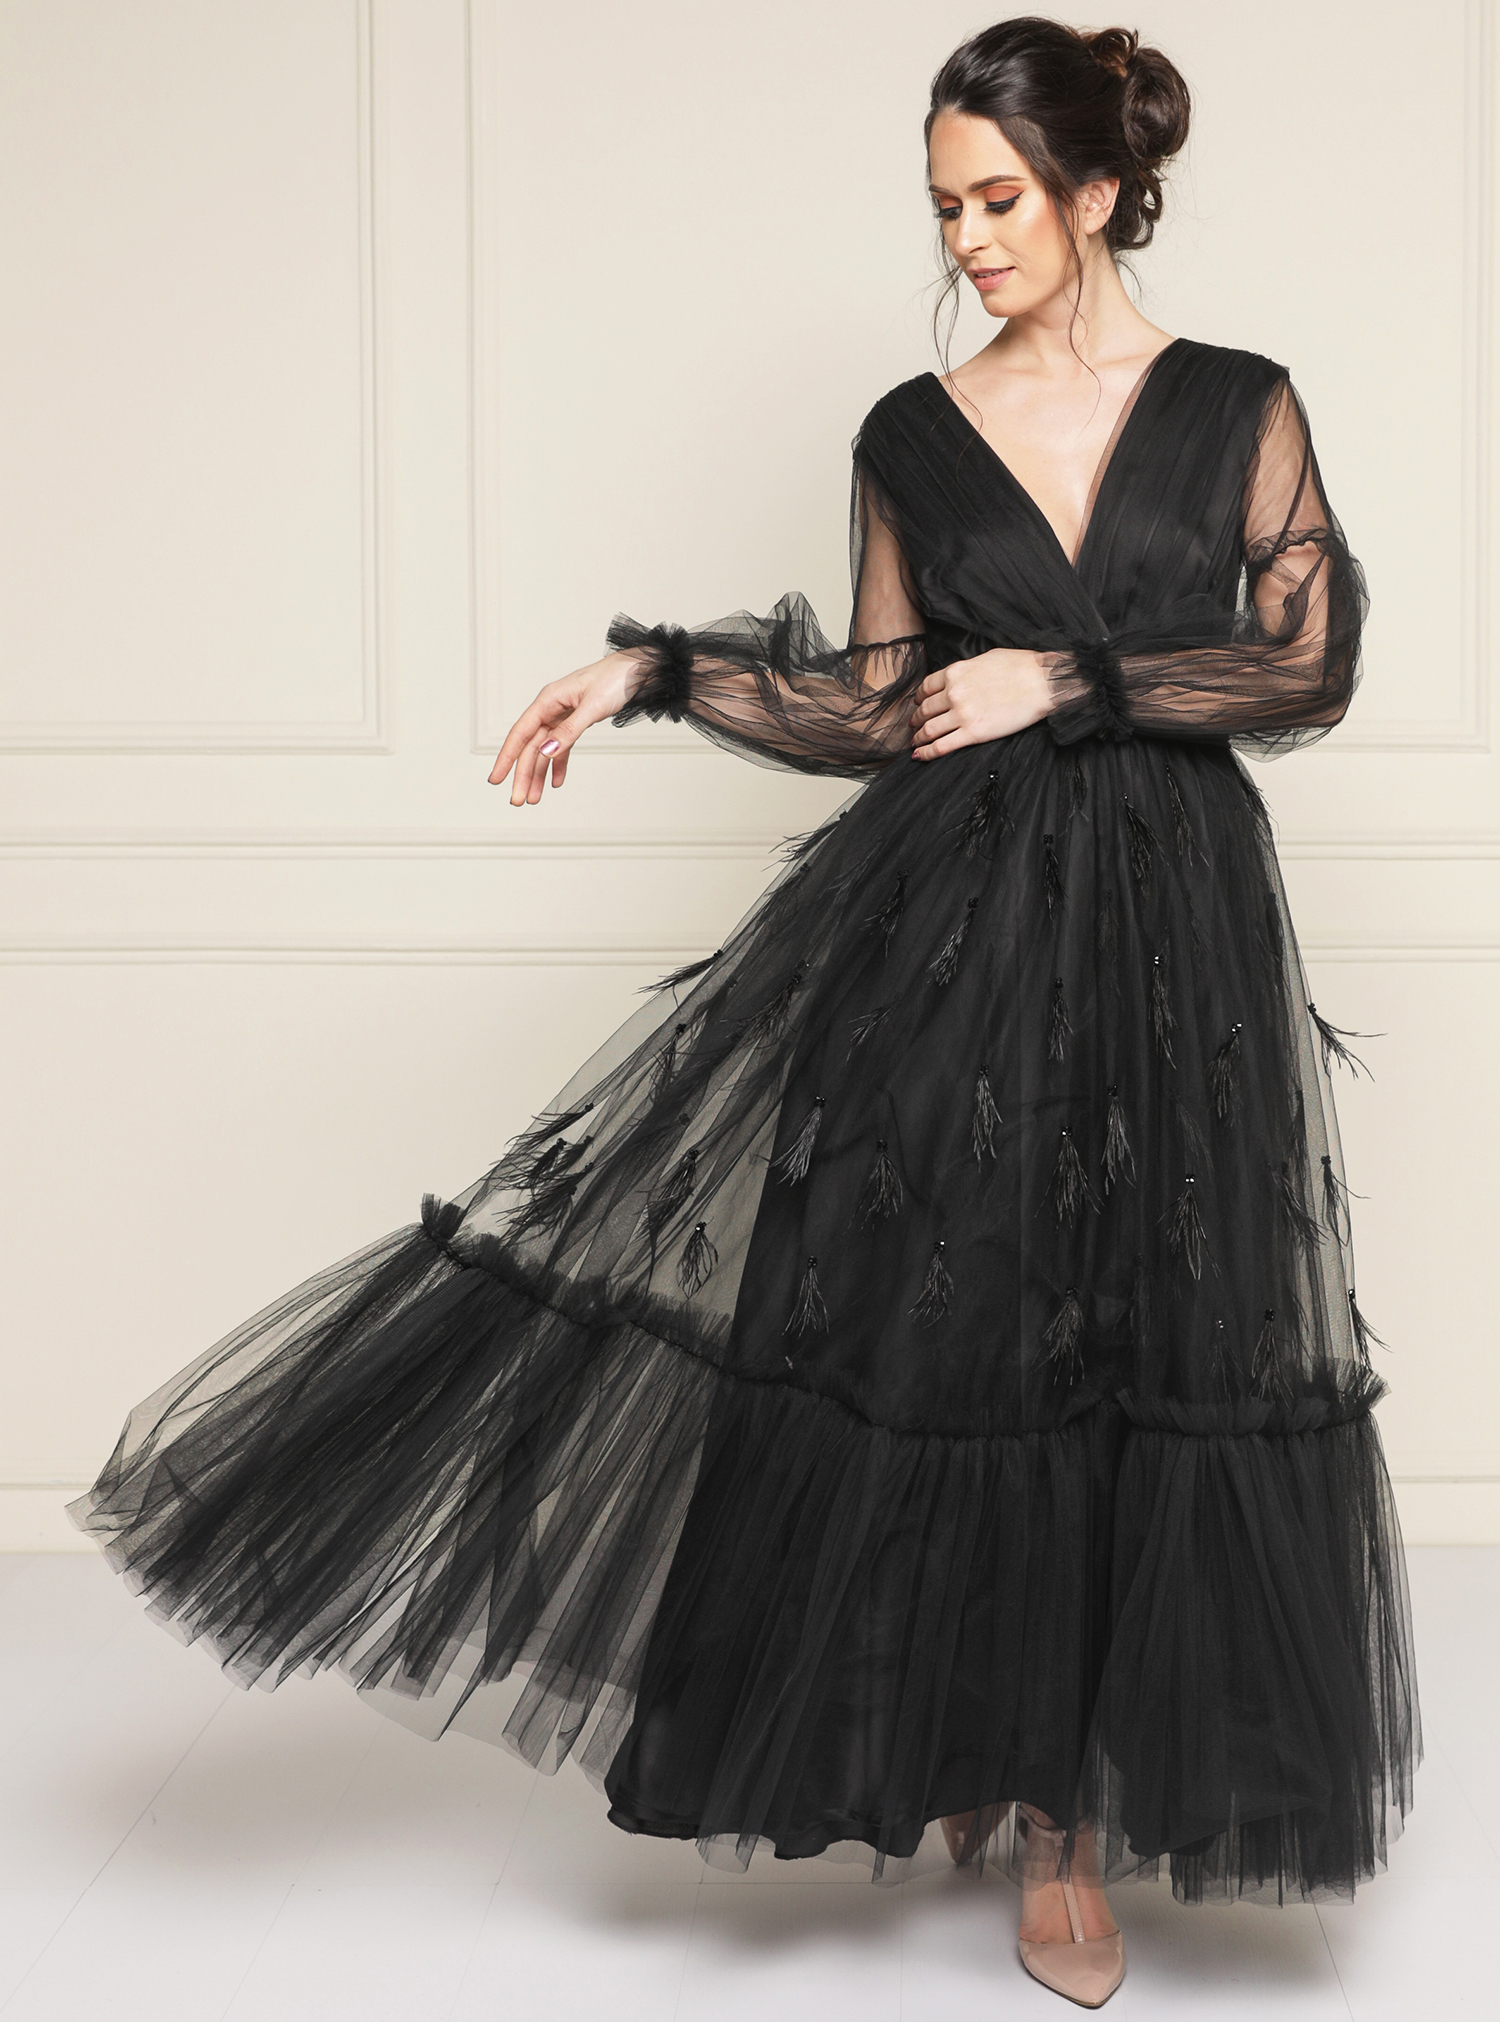 NBQ20002A Tulle layered gown with feathers and embellishment 